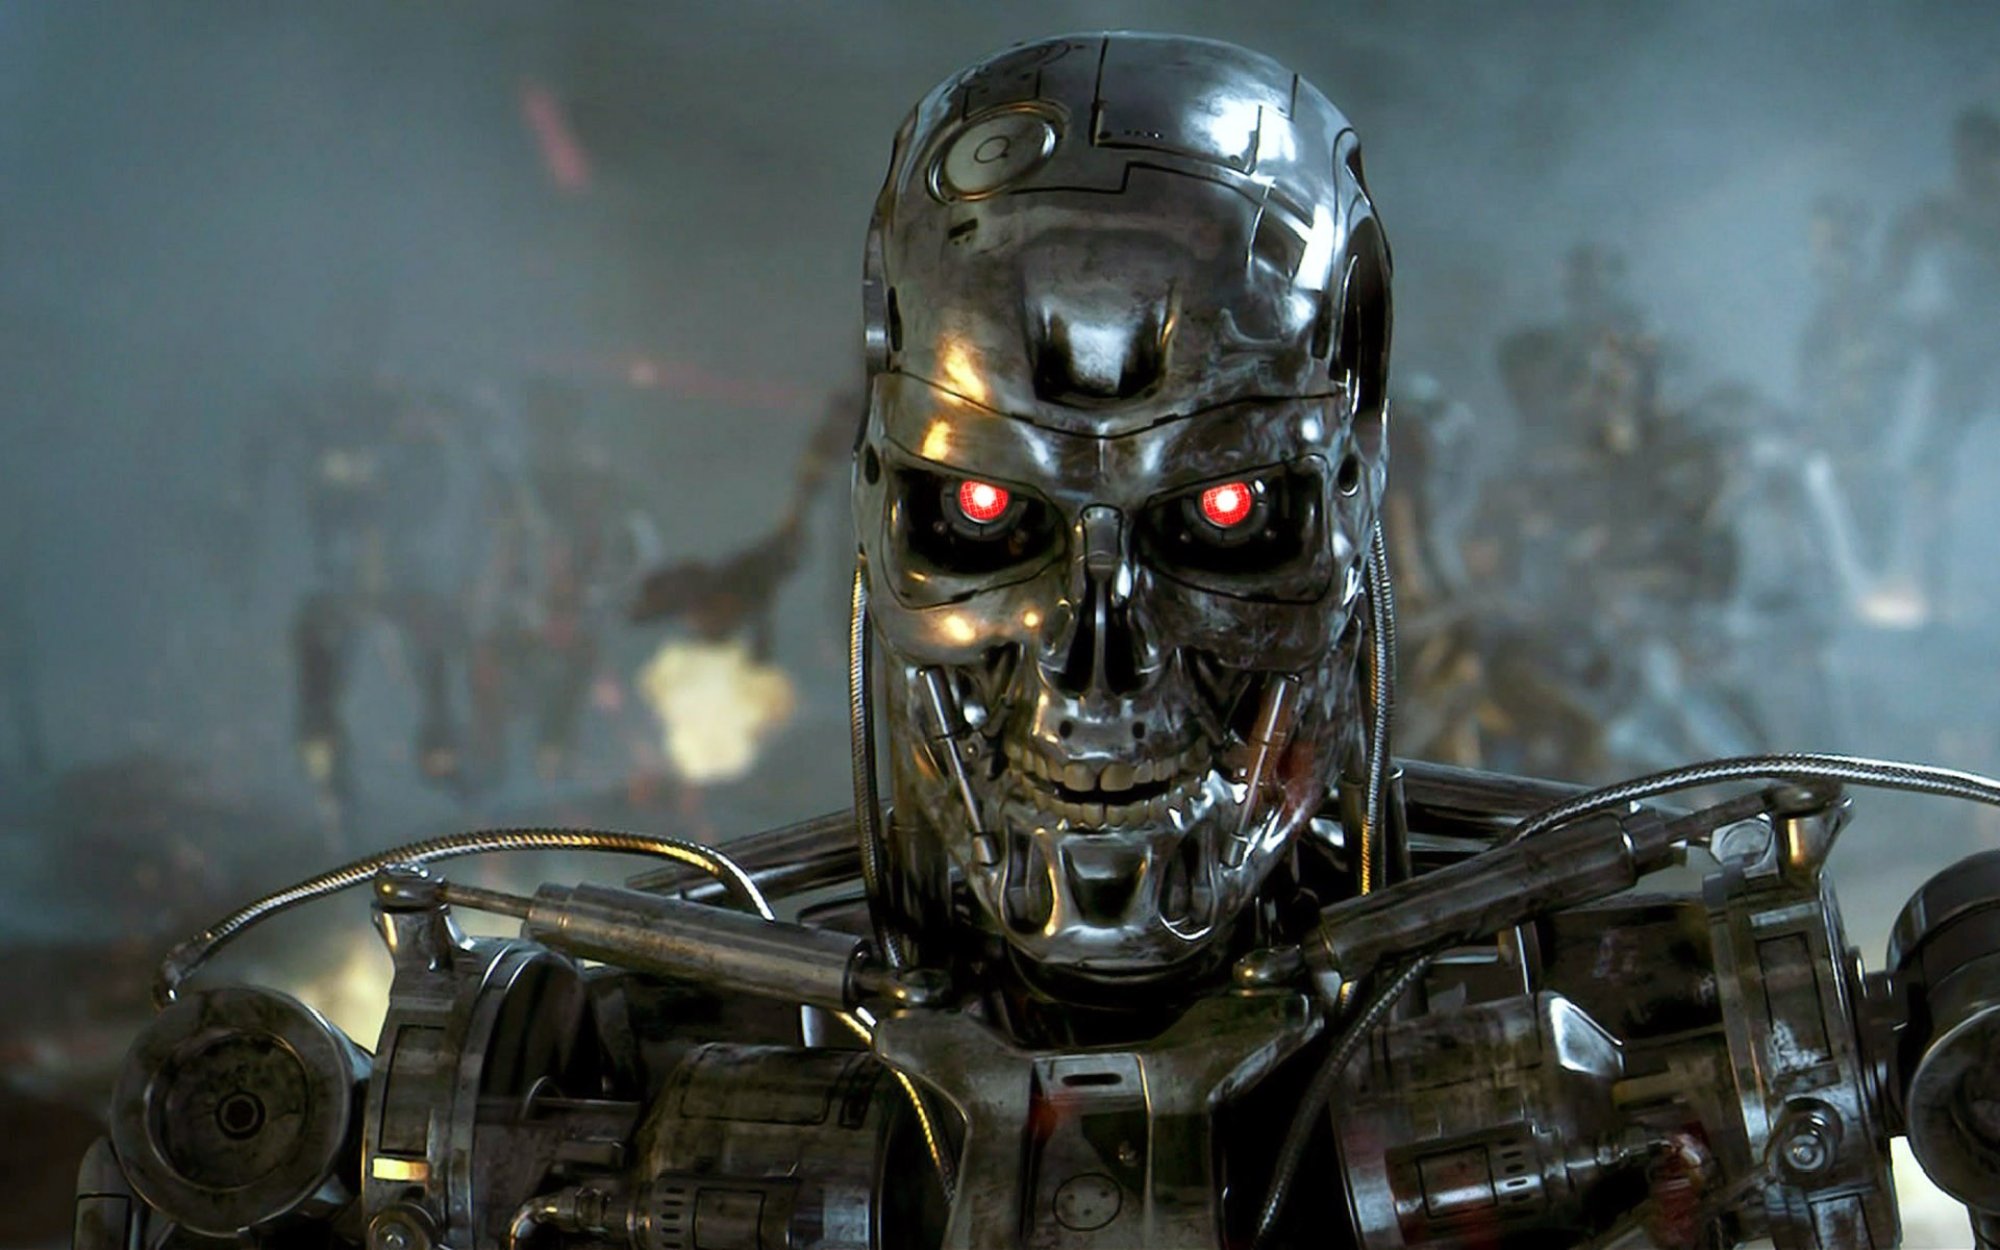 Robocop and Terminator will get some real-life competition. Source: kinopoisk.ru